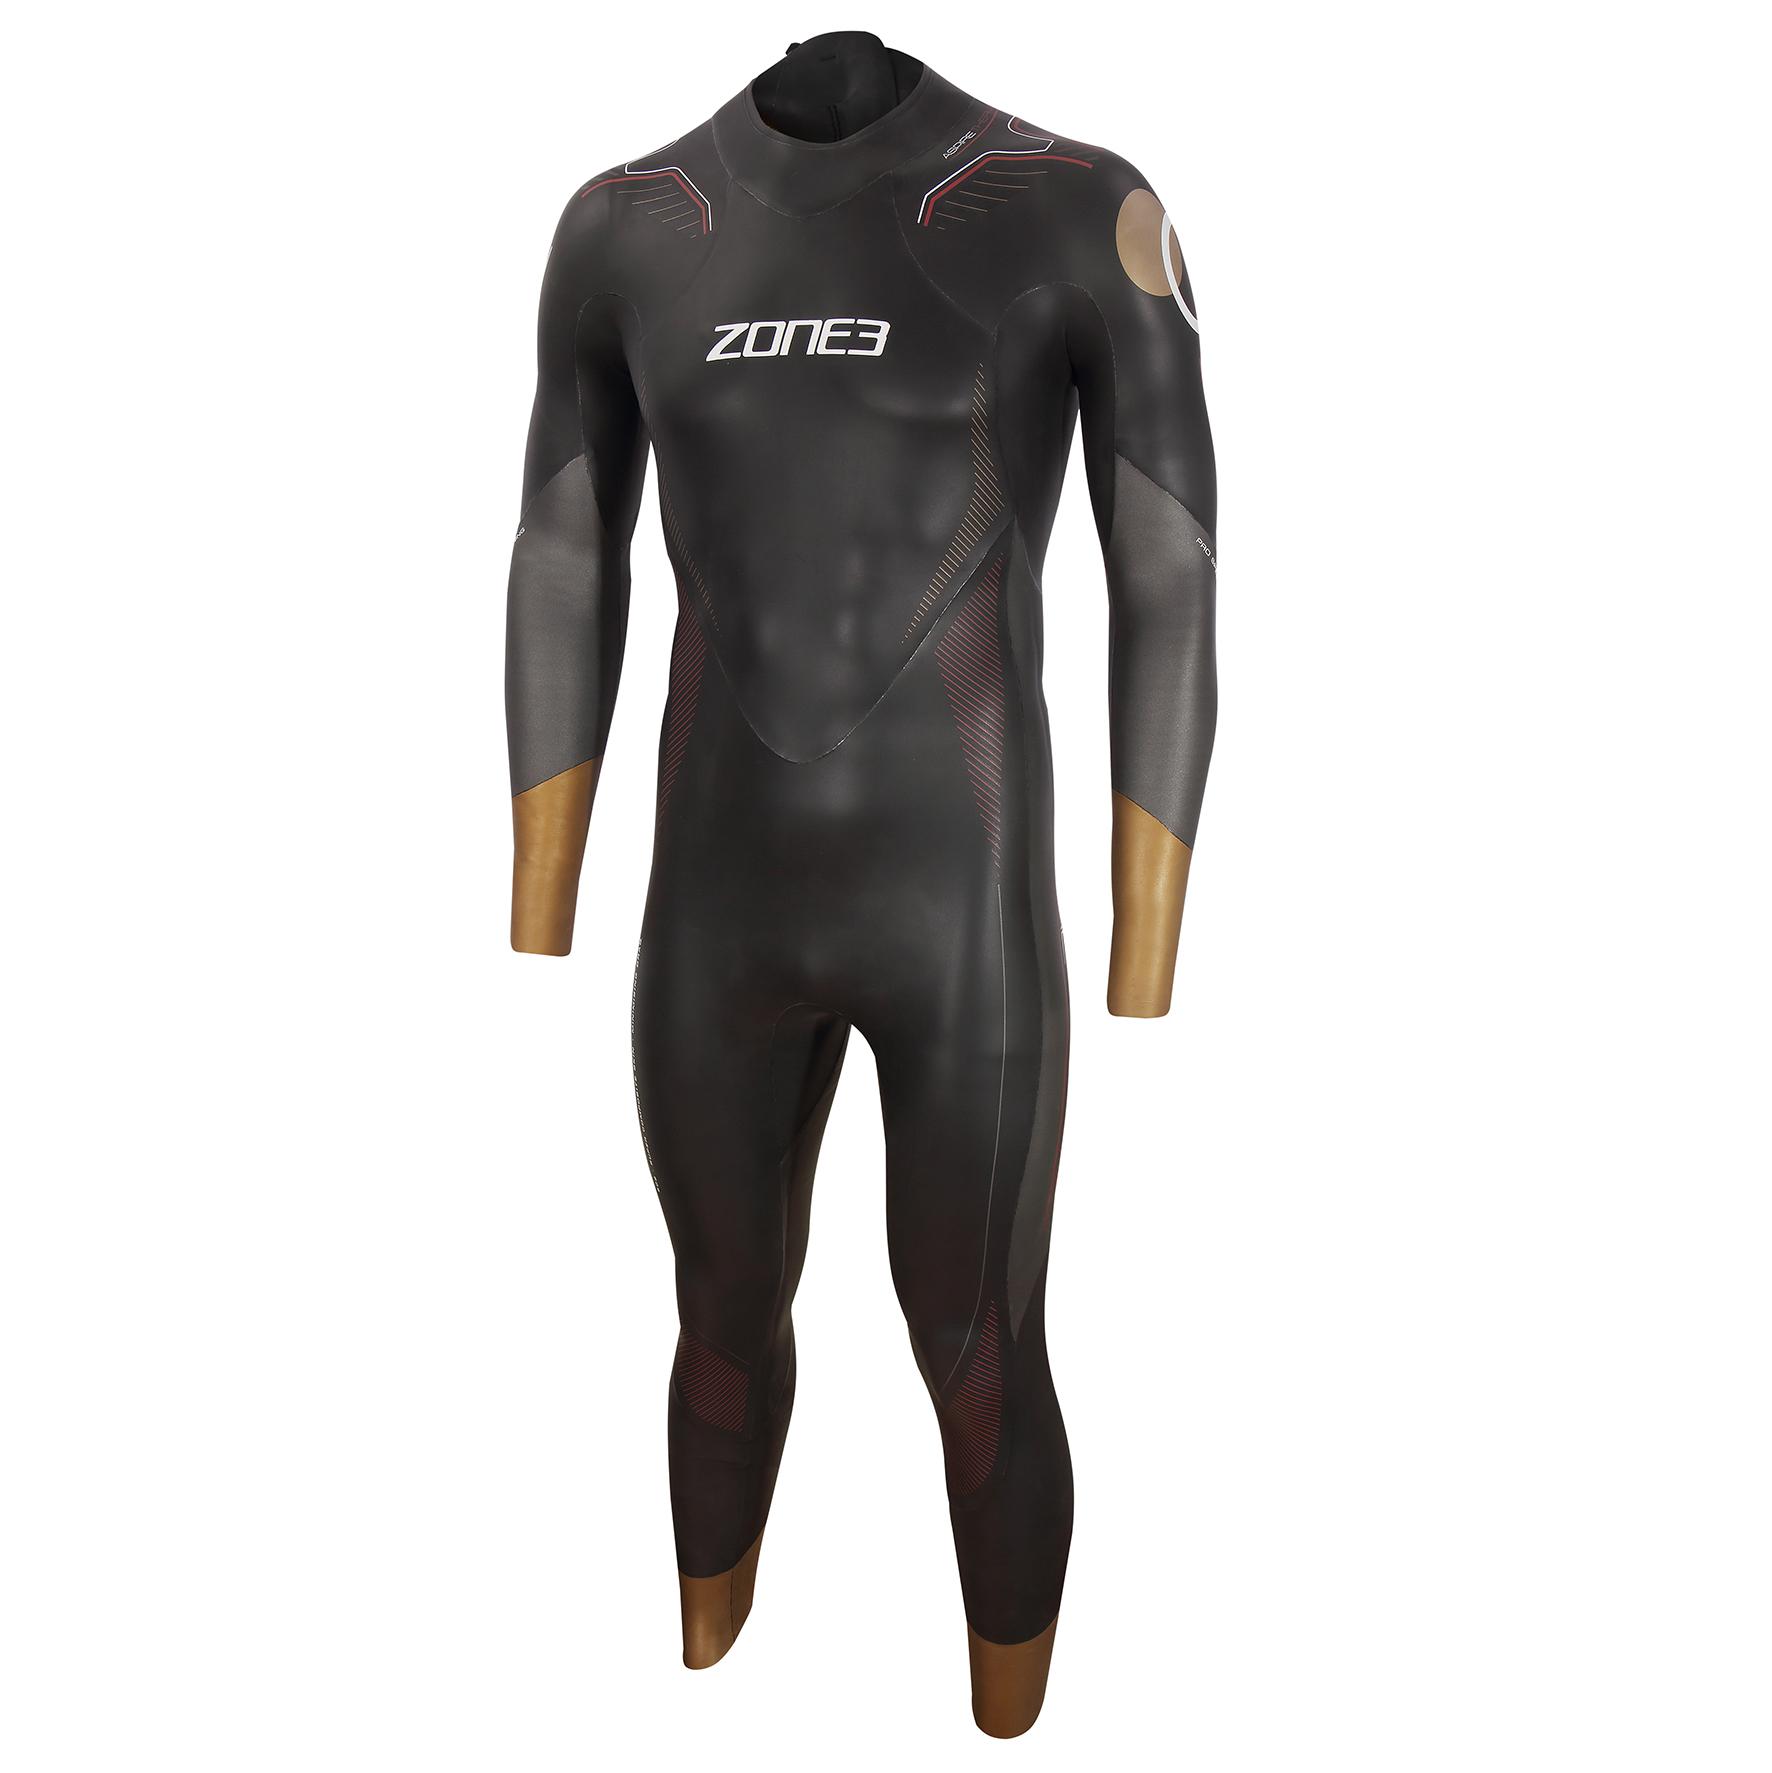 Zone3 Mens Thermal Aspire Wetsuit - Black/grey/gold/red